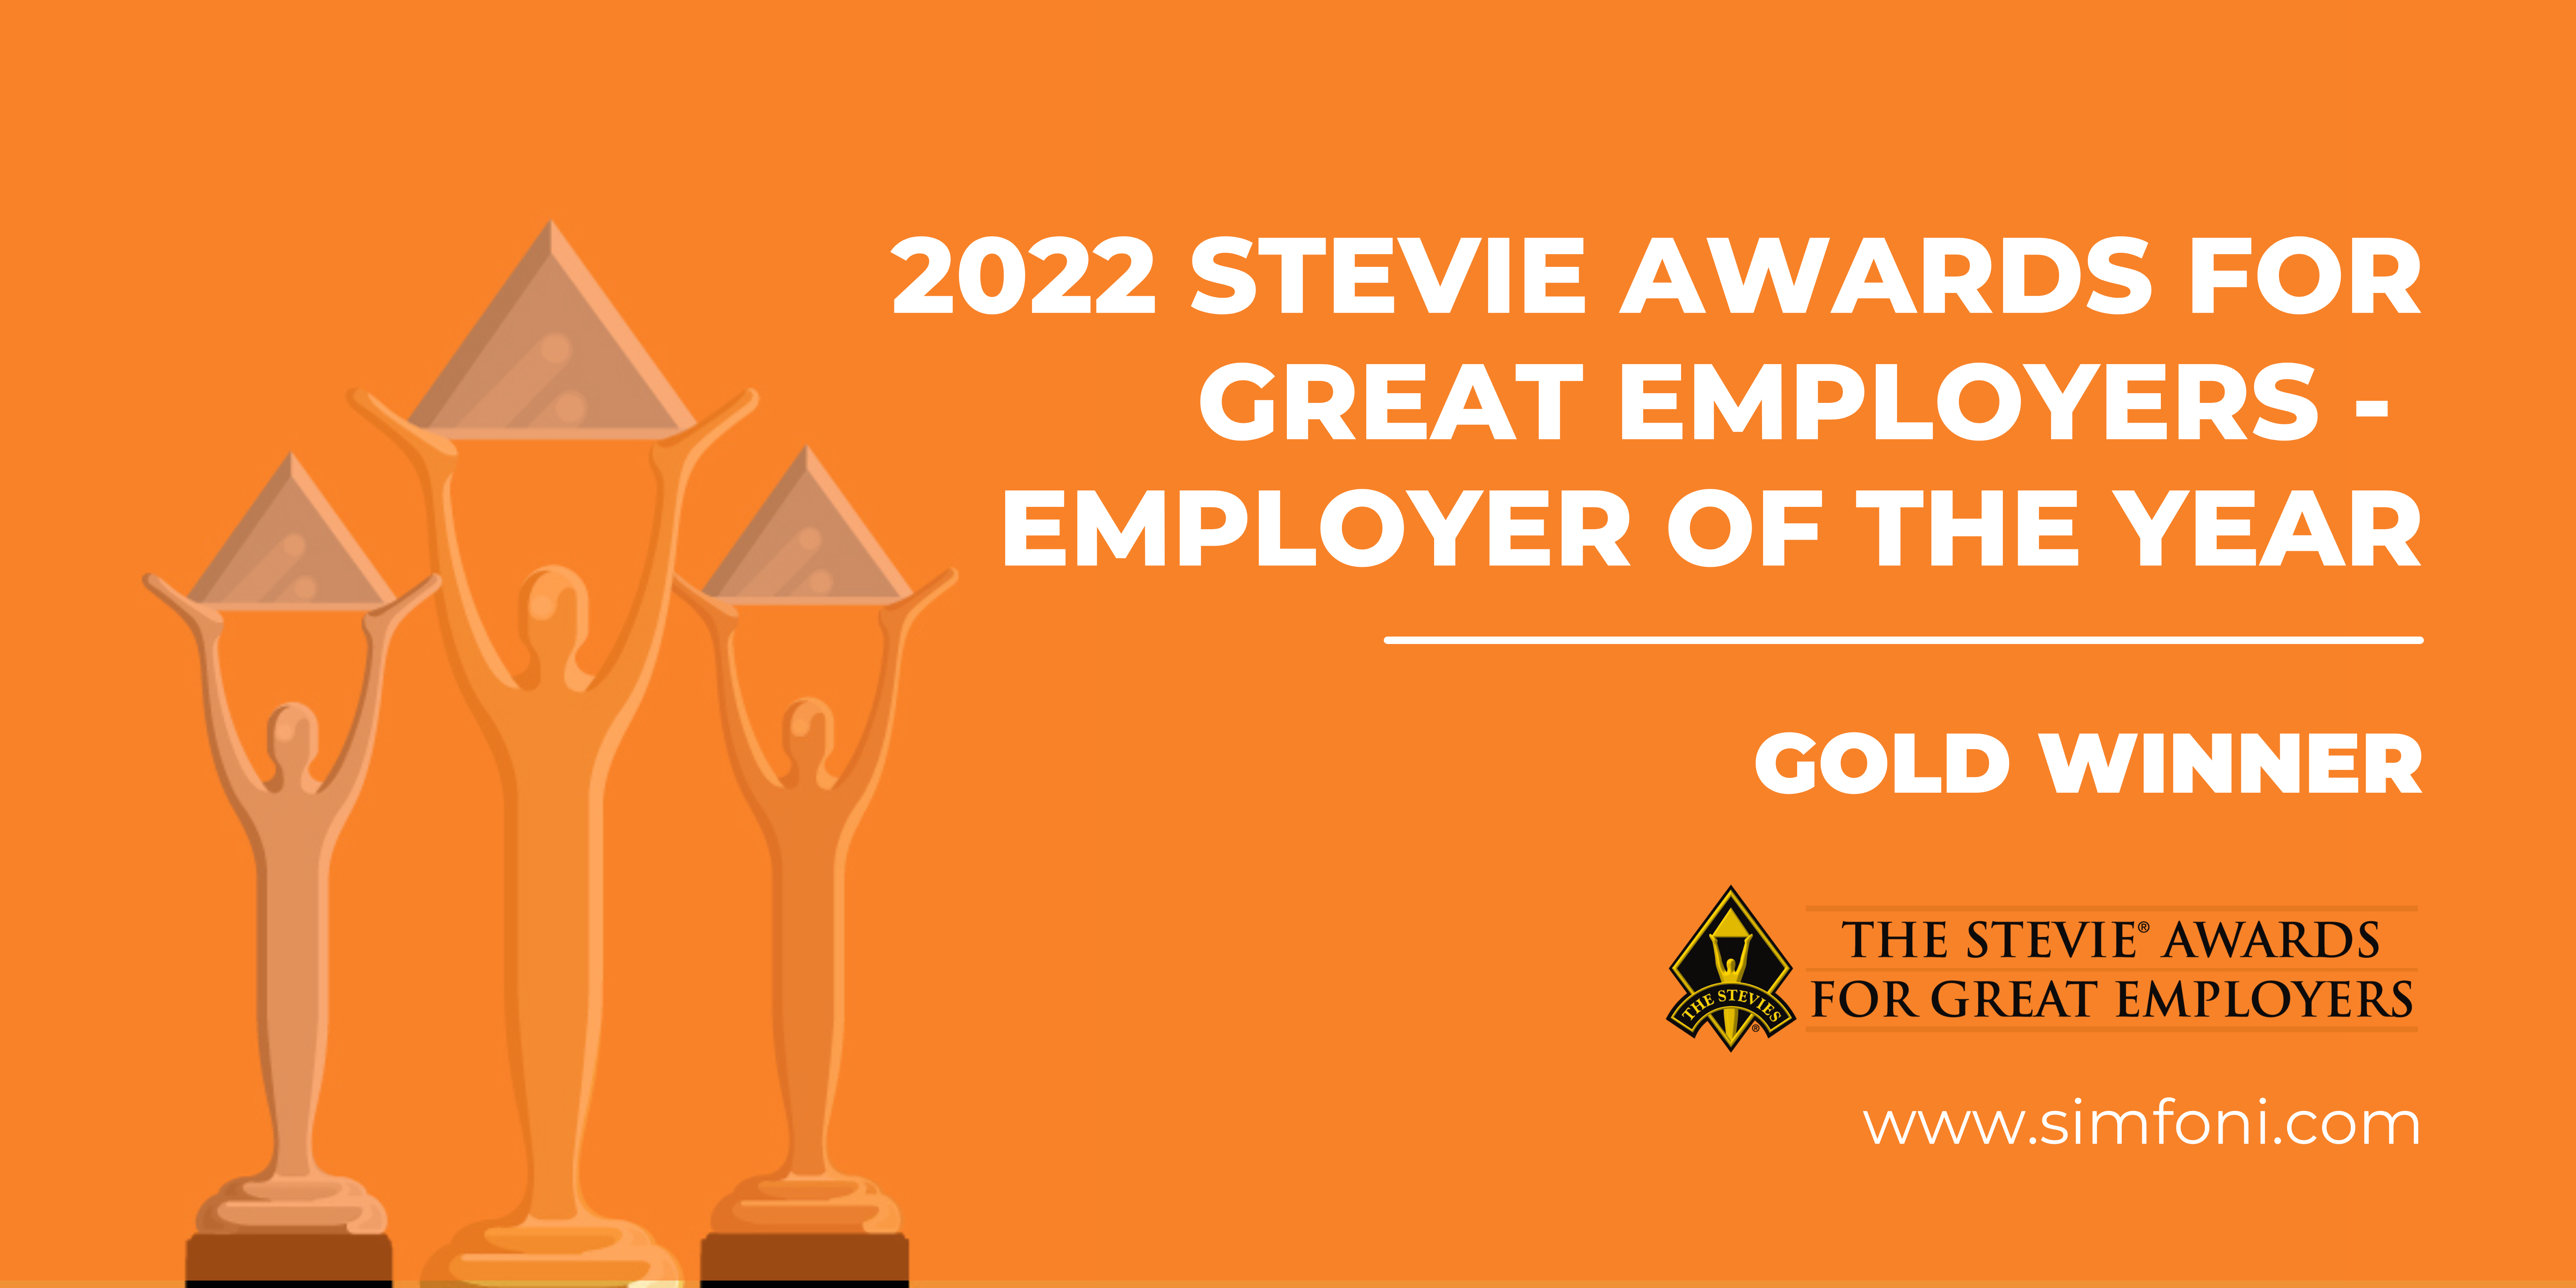 Simfoni Wins 2022 Gold “Employer of the Year” Stevie Award for Great Employers